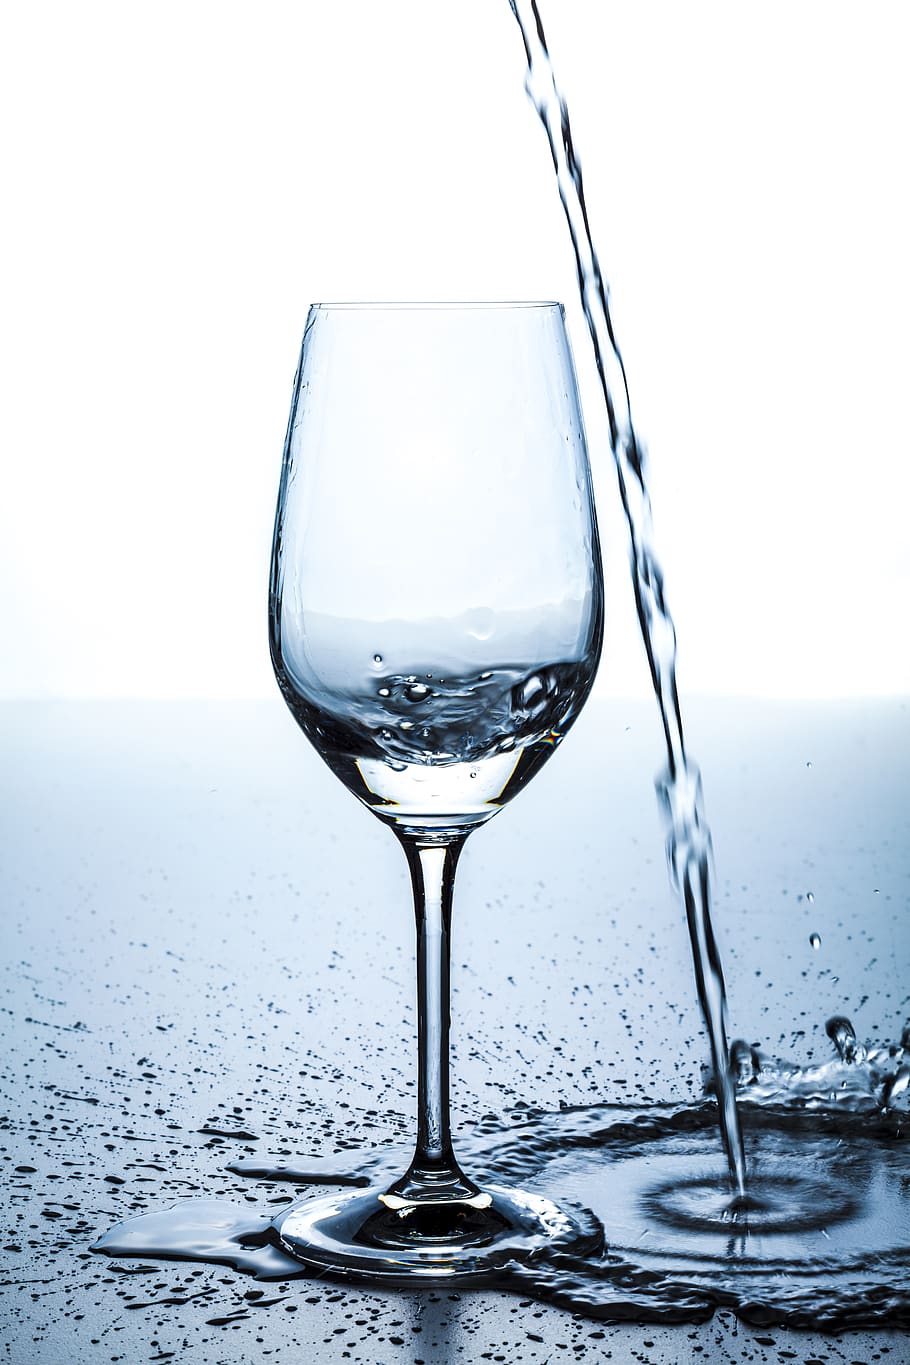 glass, water, spill, inject, error, fun, table, glass - material, food and drink, wineglass